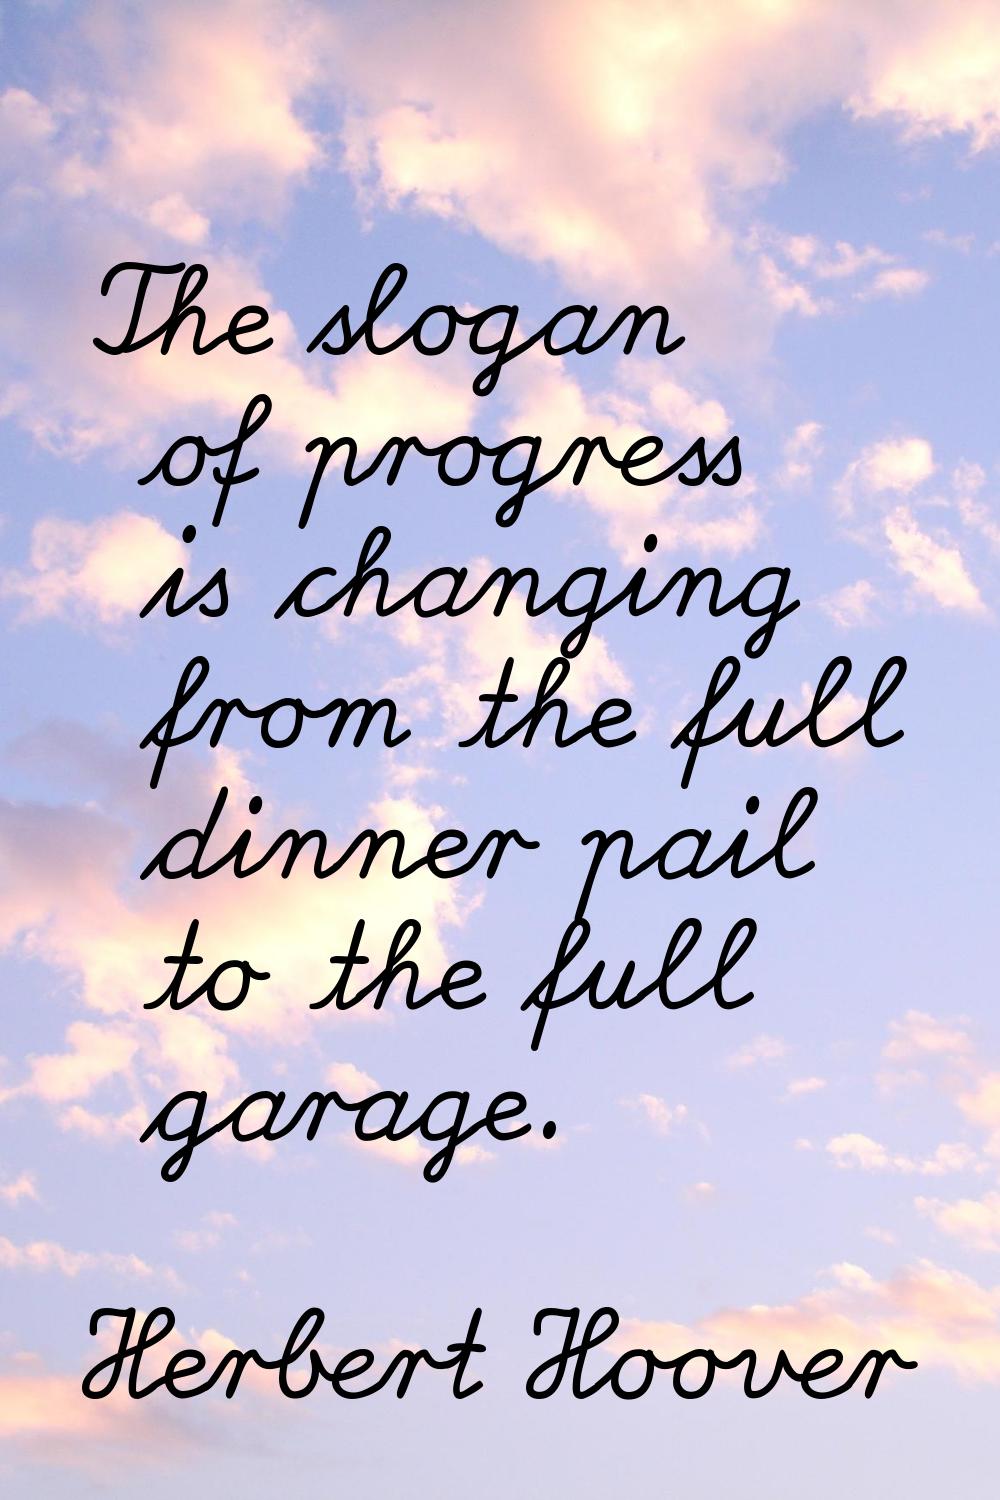 The slogan of progress is changing from the full dinner pail to the full garage.